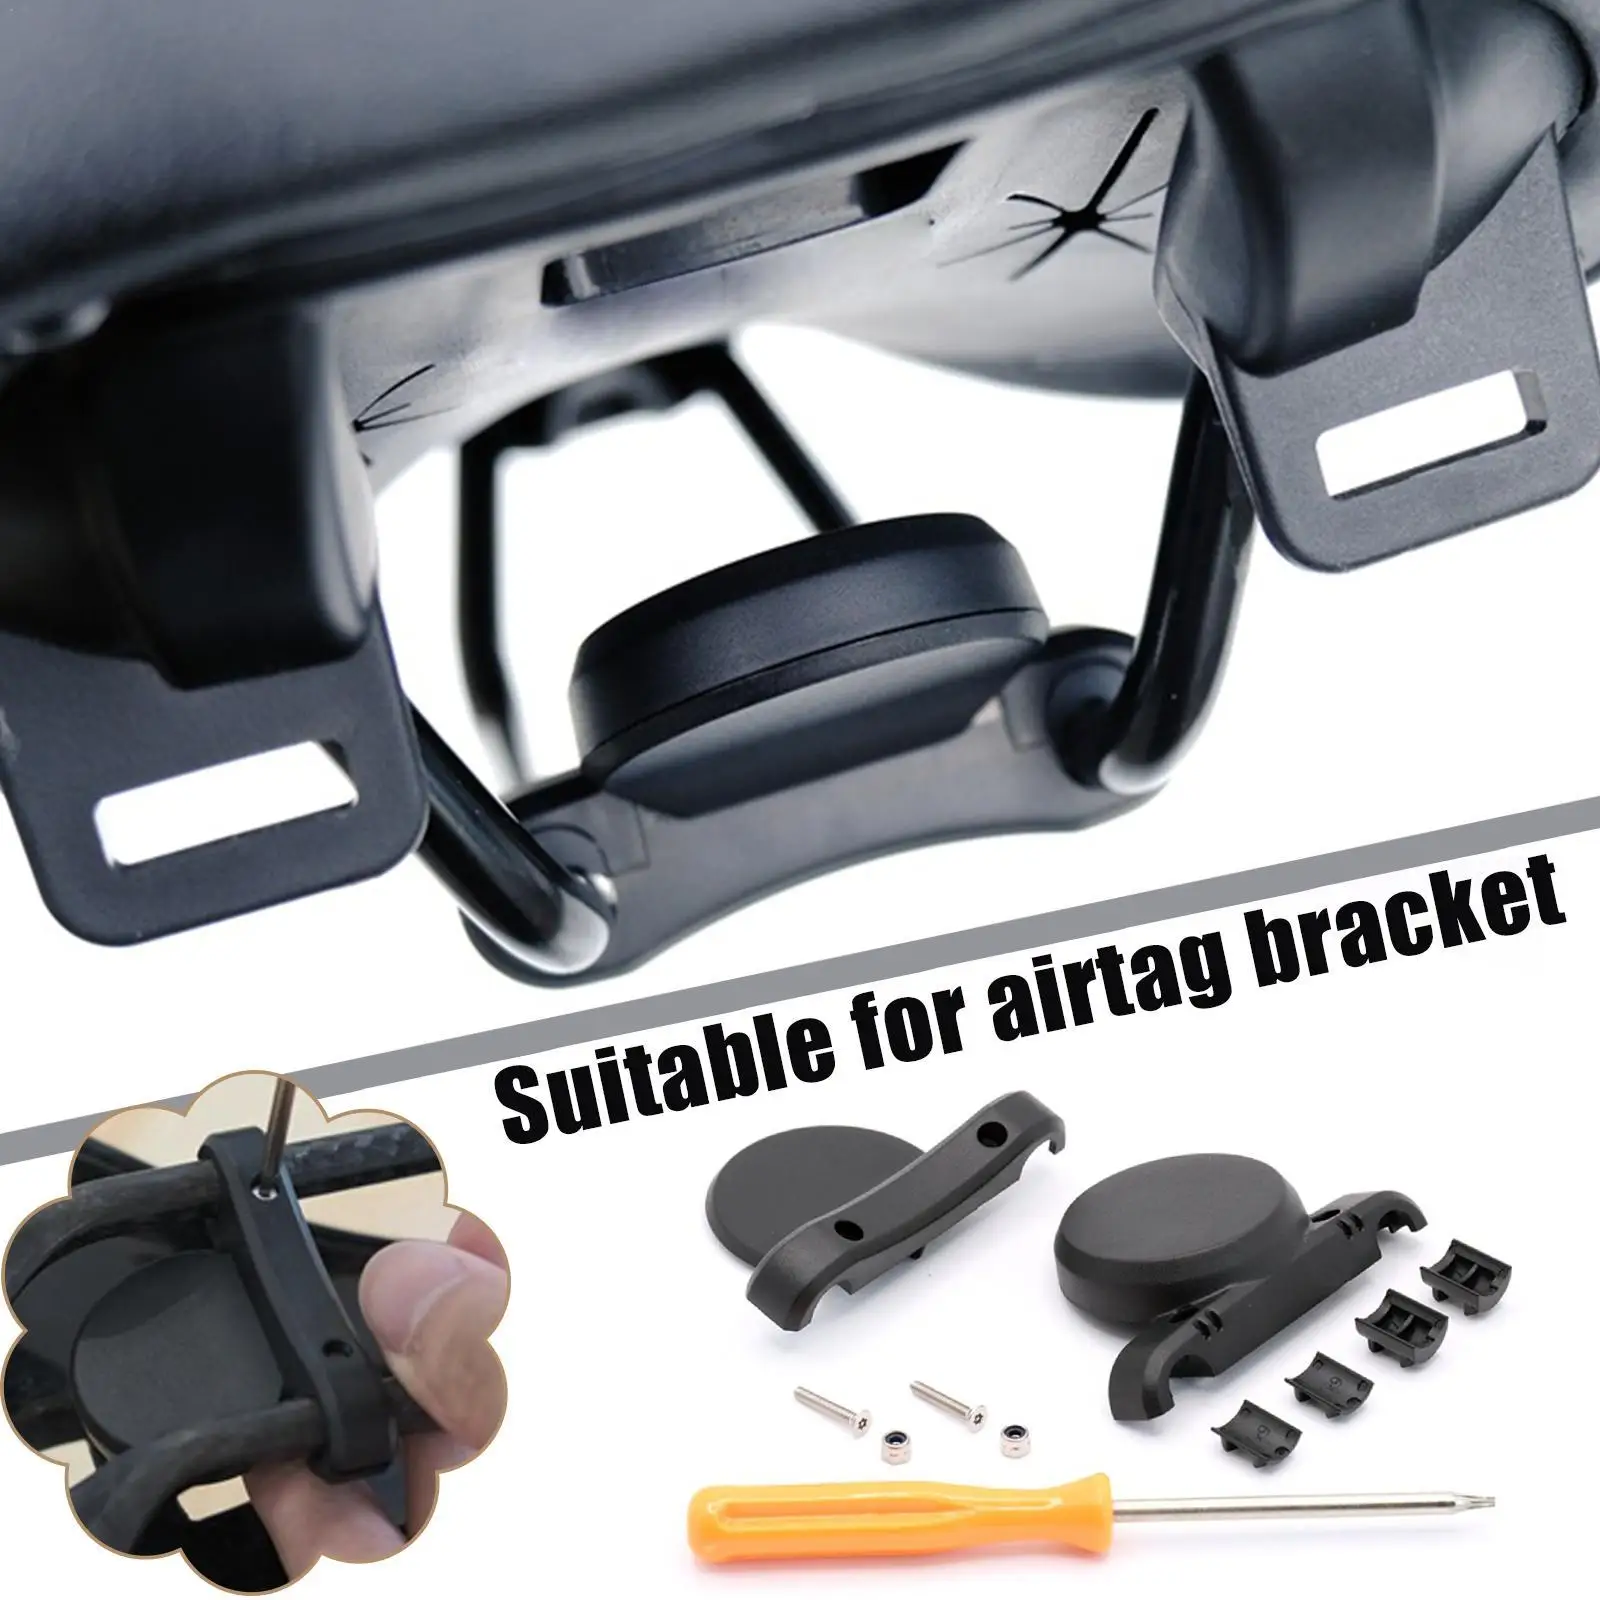 Bike Holder Bracket Protective For Airtag Air Tag Anti-theft